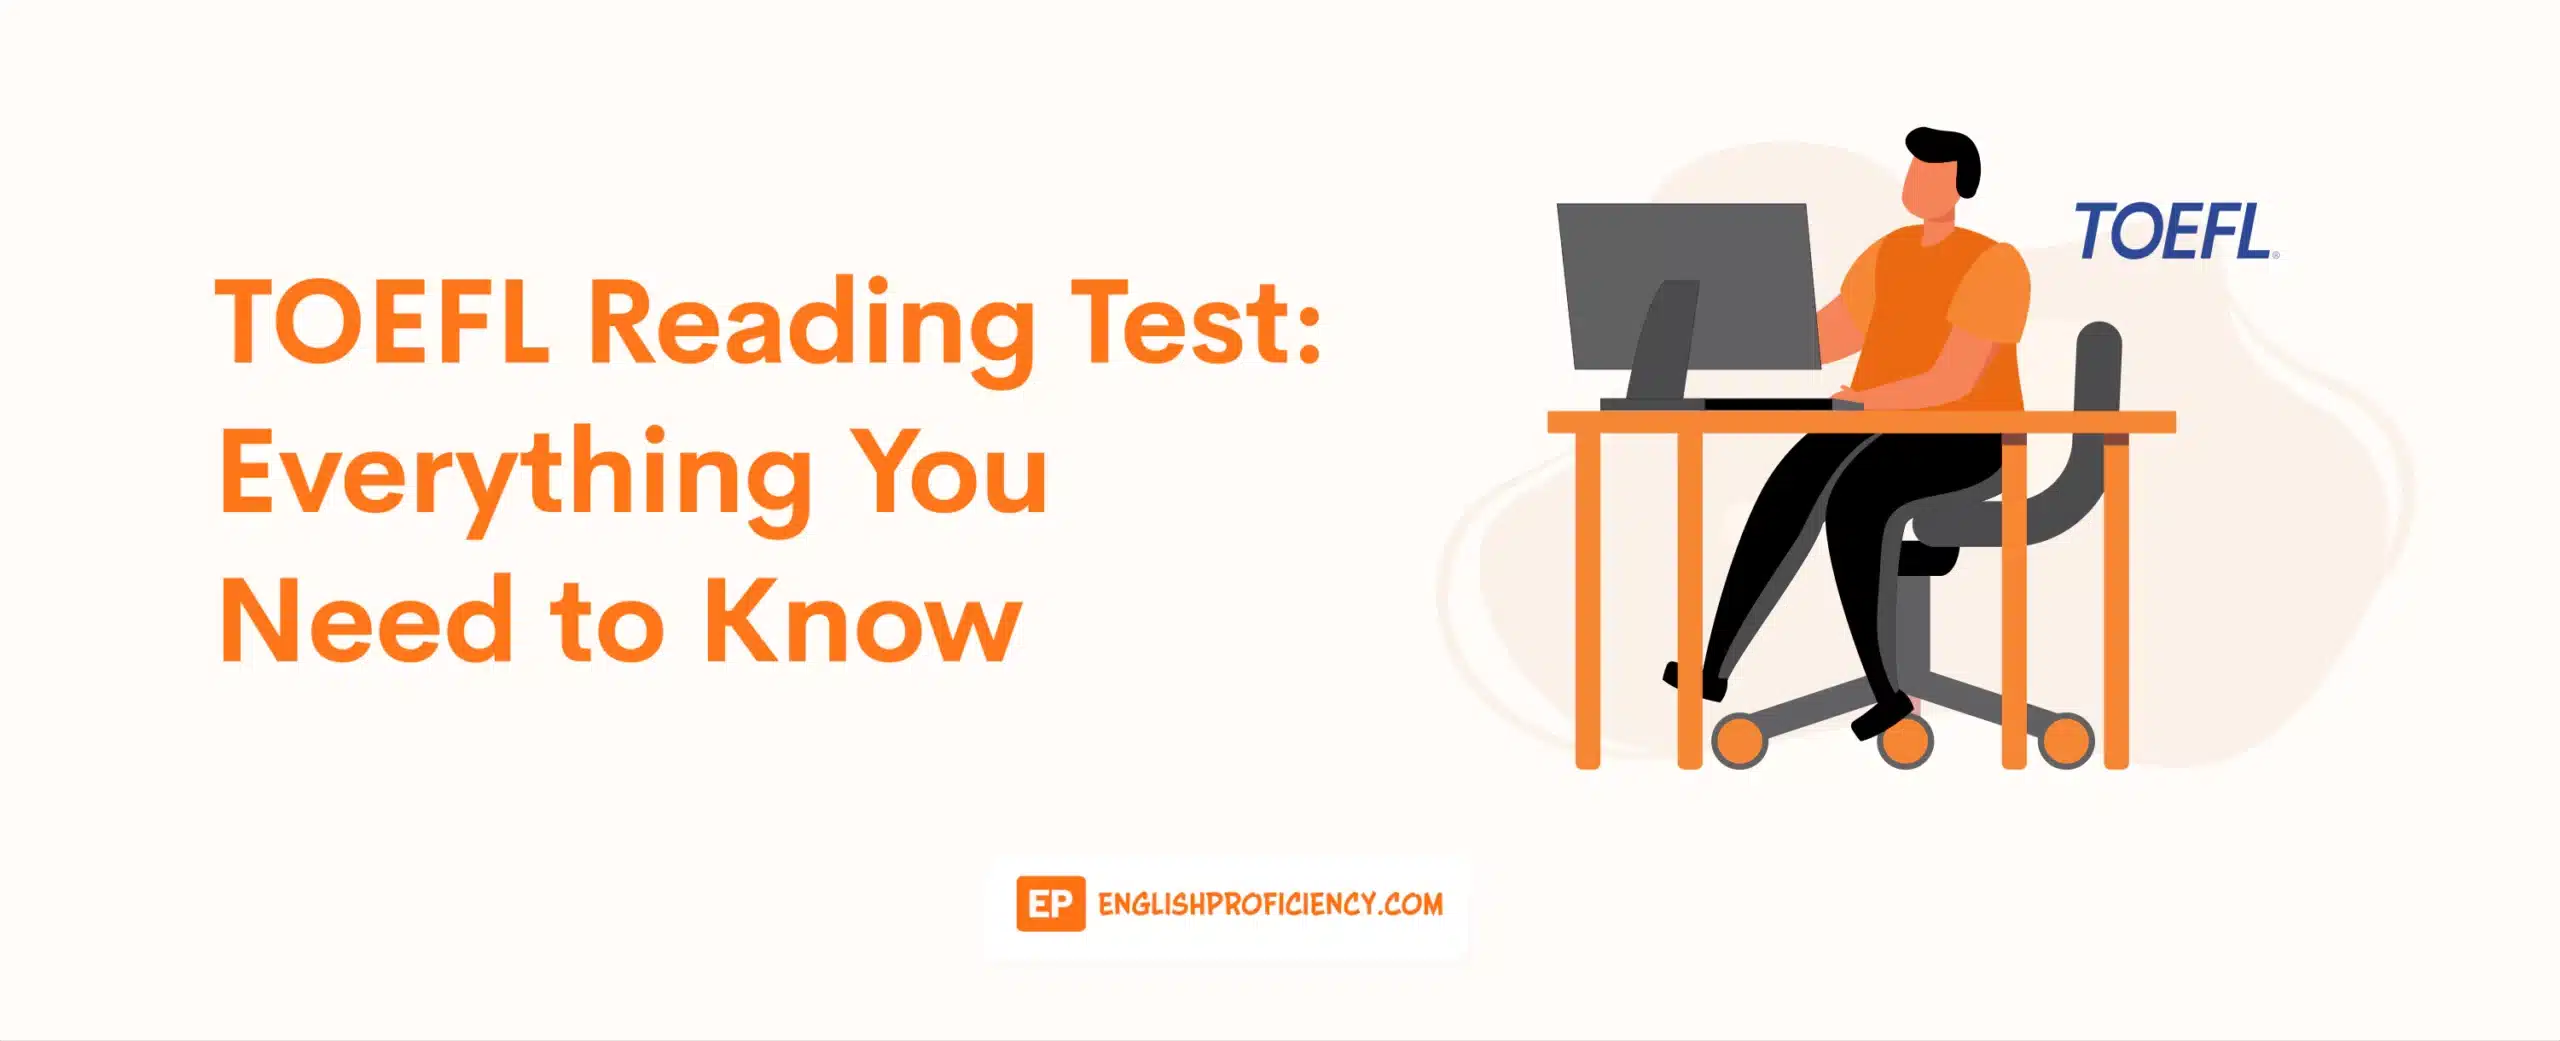 TOEFL Reading Test Everything You Need to Know